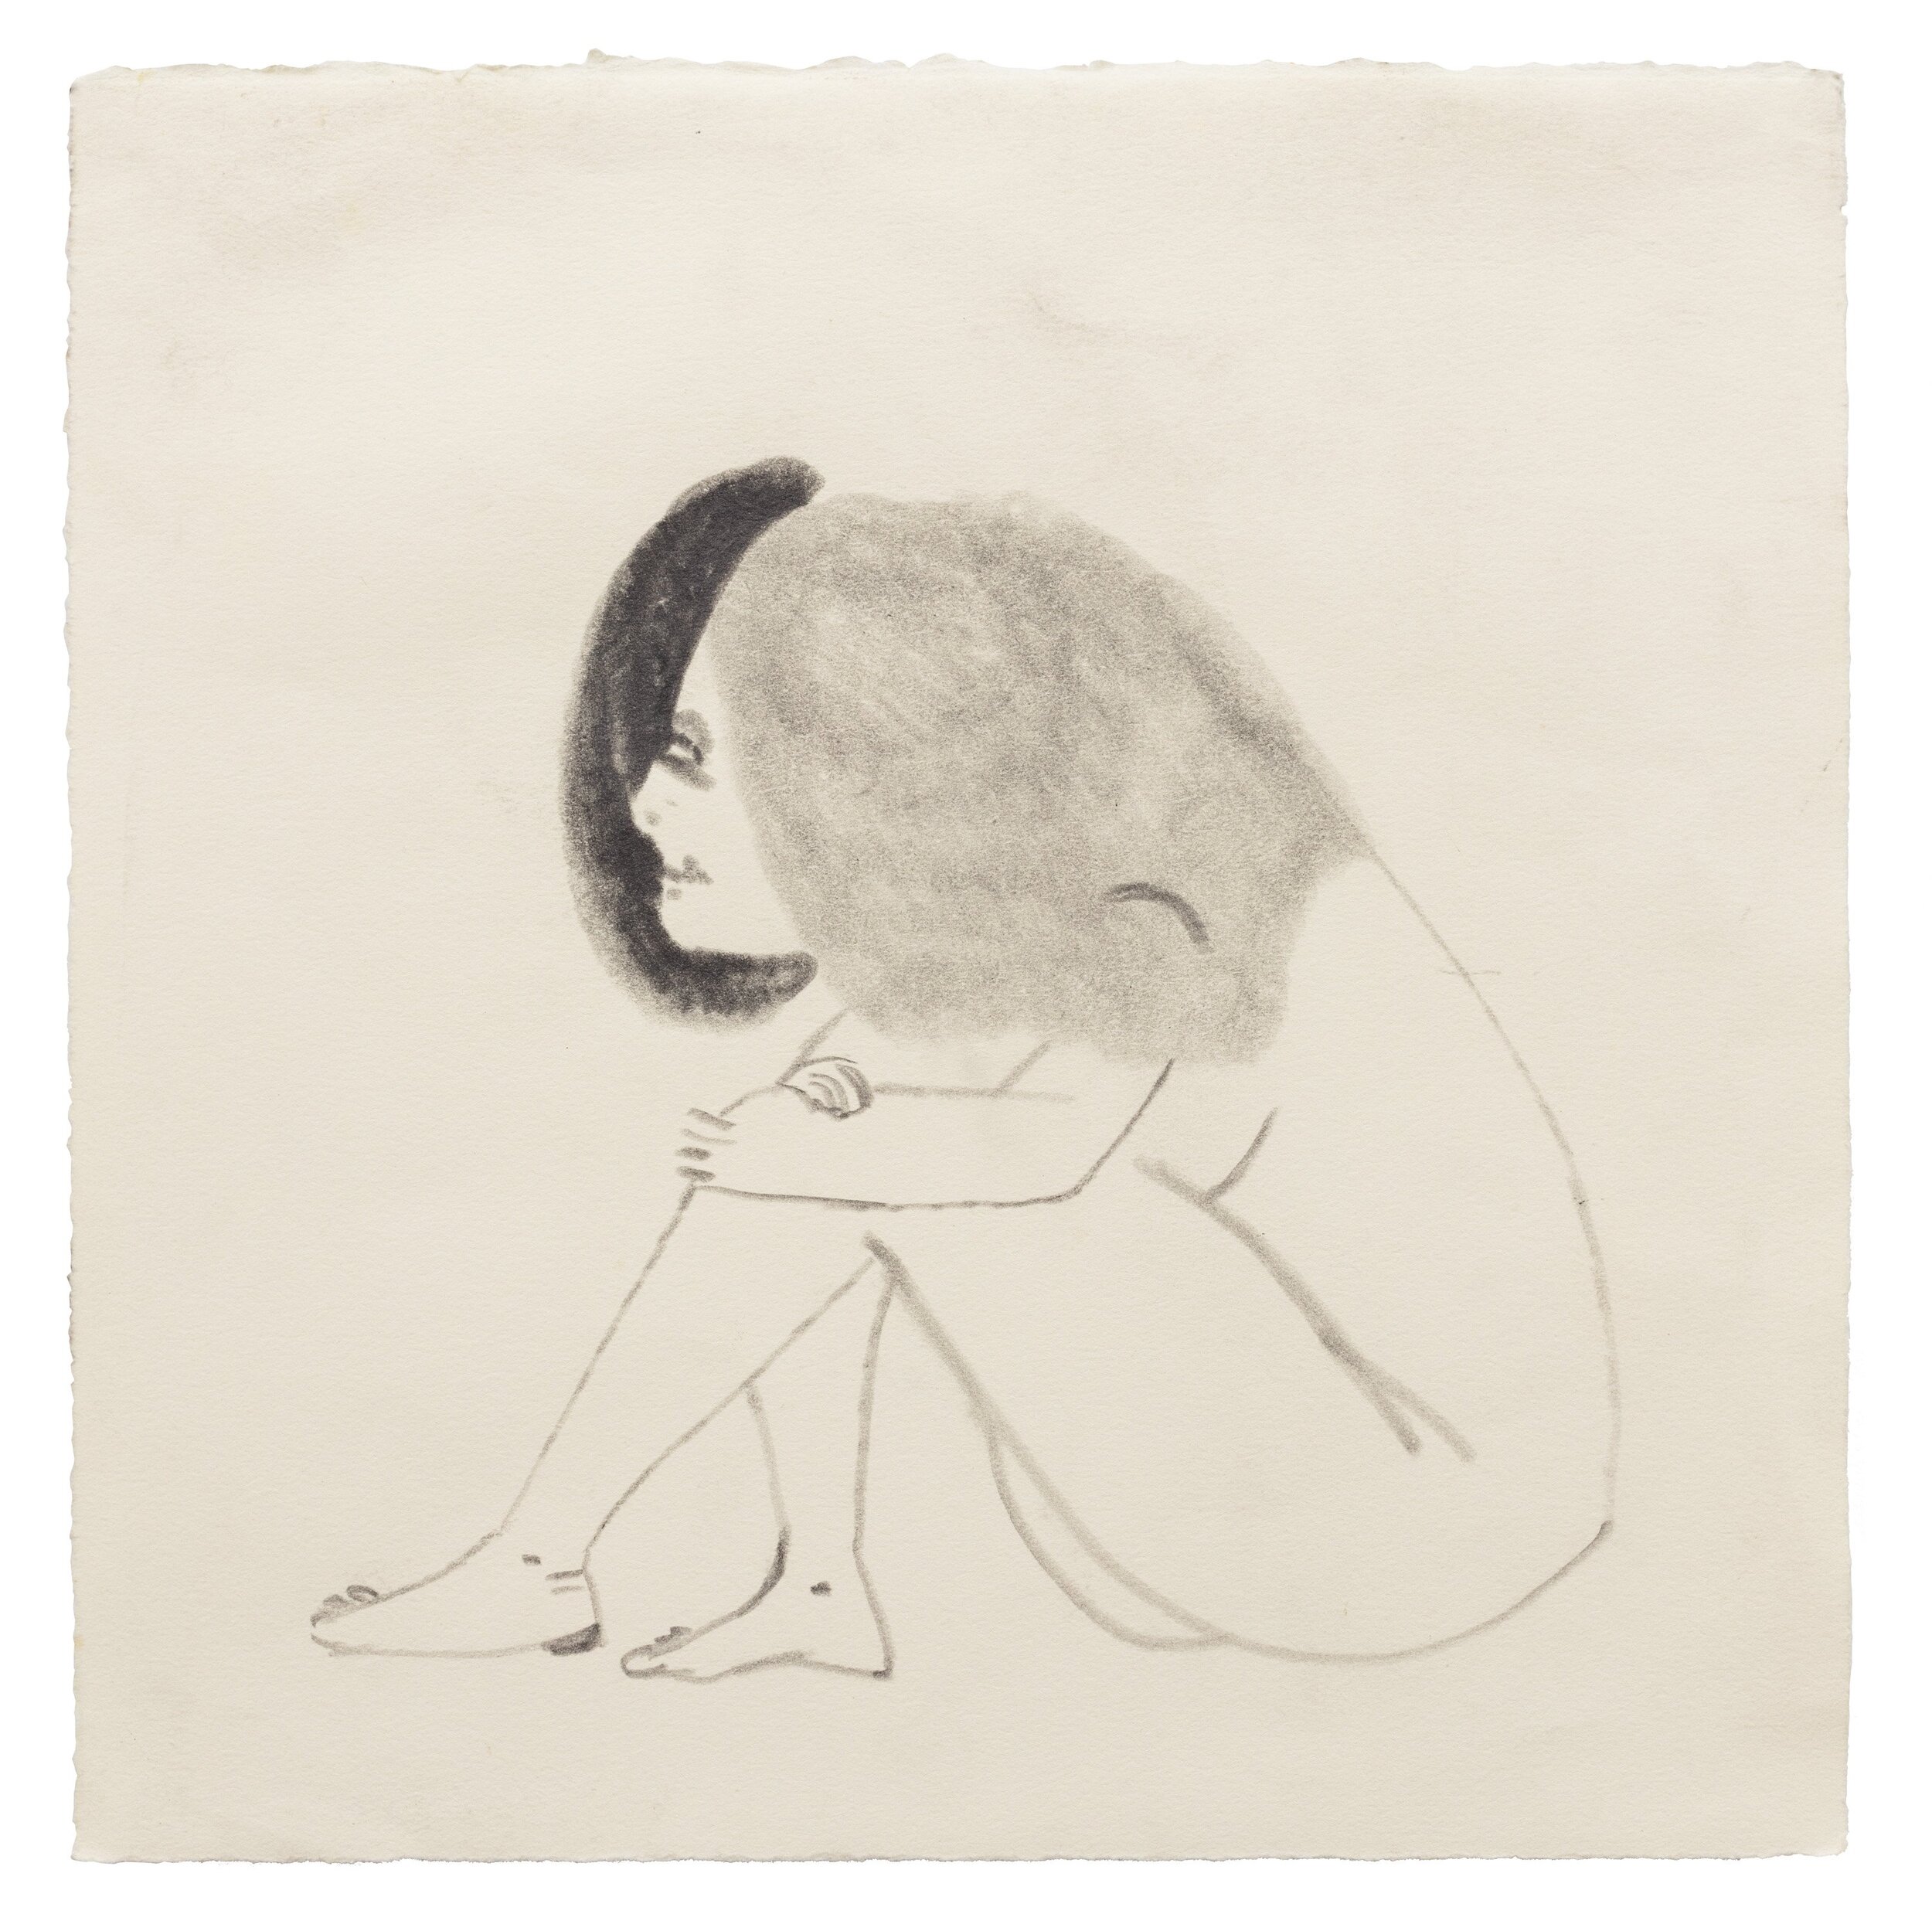 Kenny Rivero, Orlop (Lowest Deck of a Ship), 2015-2020, graphite on paper, 10.75 x 11 inches, courtesy of the artist and Charles Moffett Gallery, New York.jpg